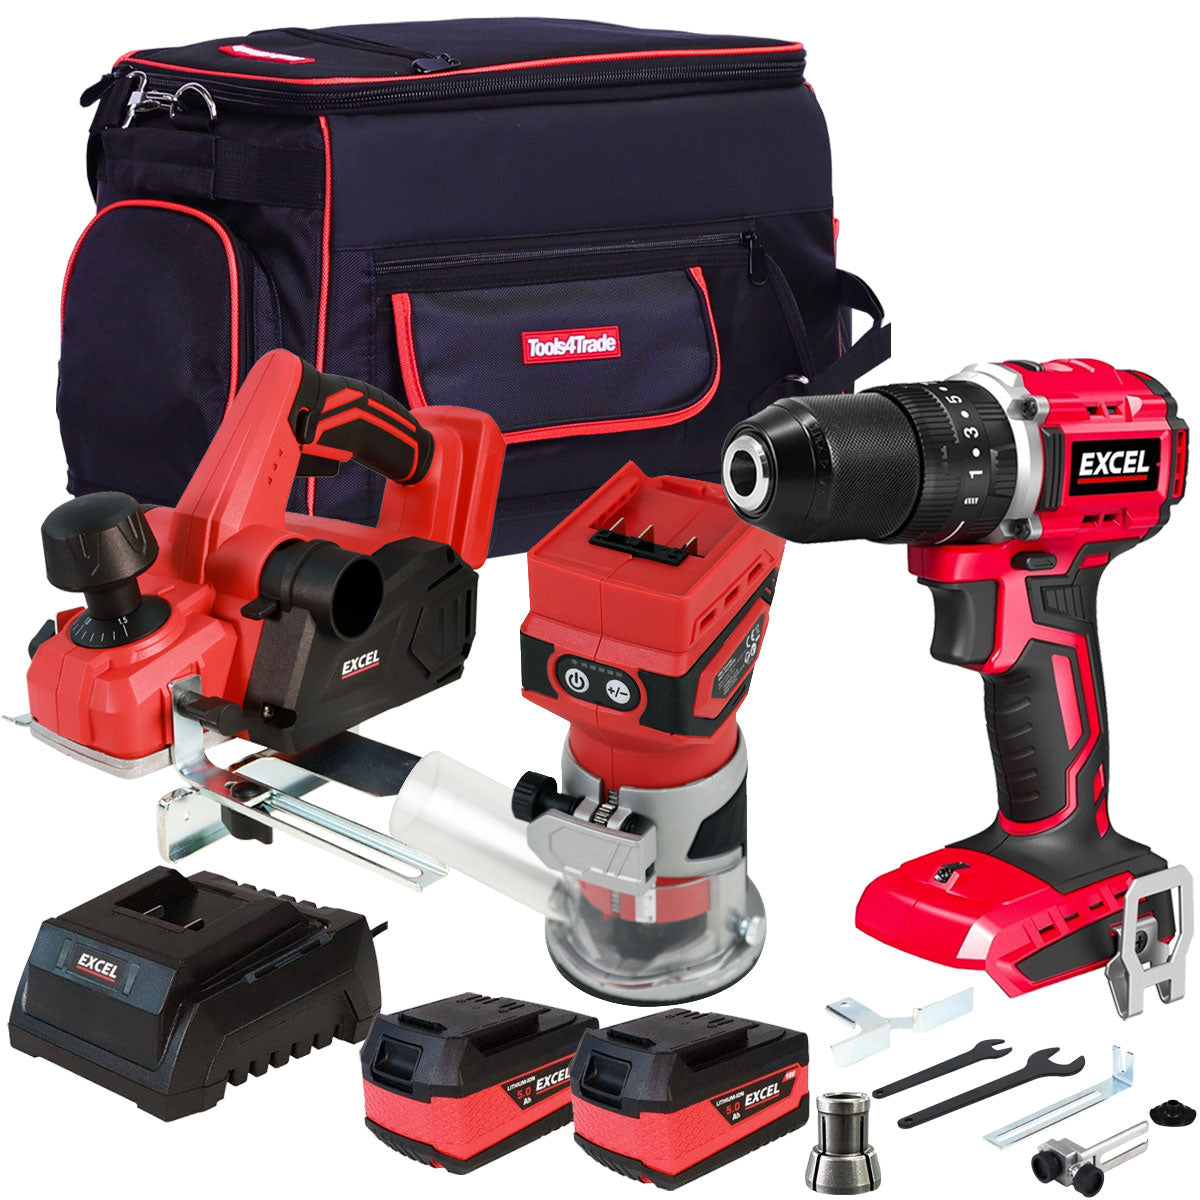 Excel 18V 3 Piece Power Tool Kit with 2 x 5.0Ah Batteries & Charger EXLKIT-16282